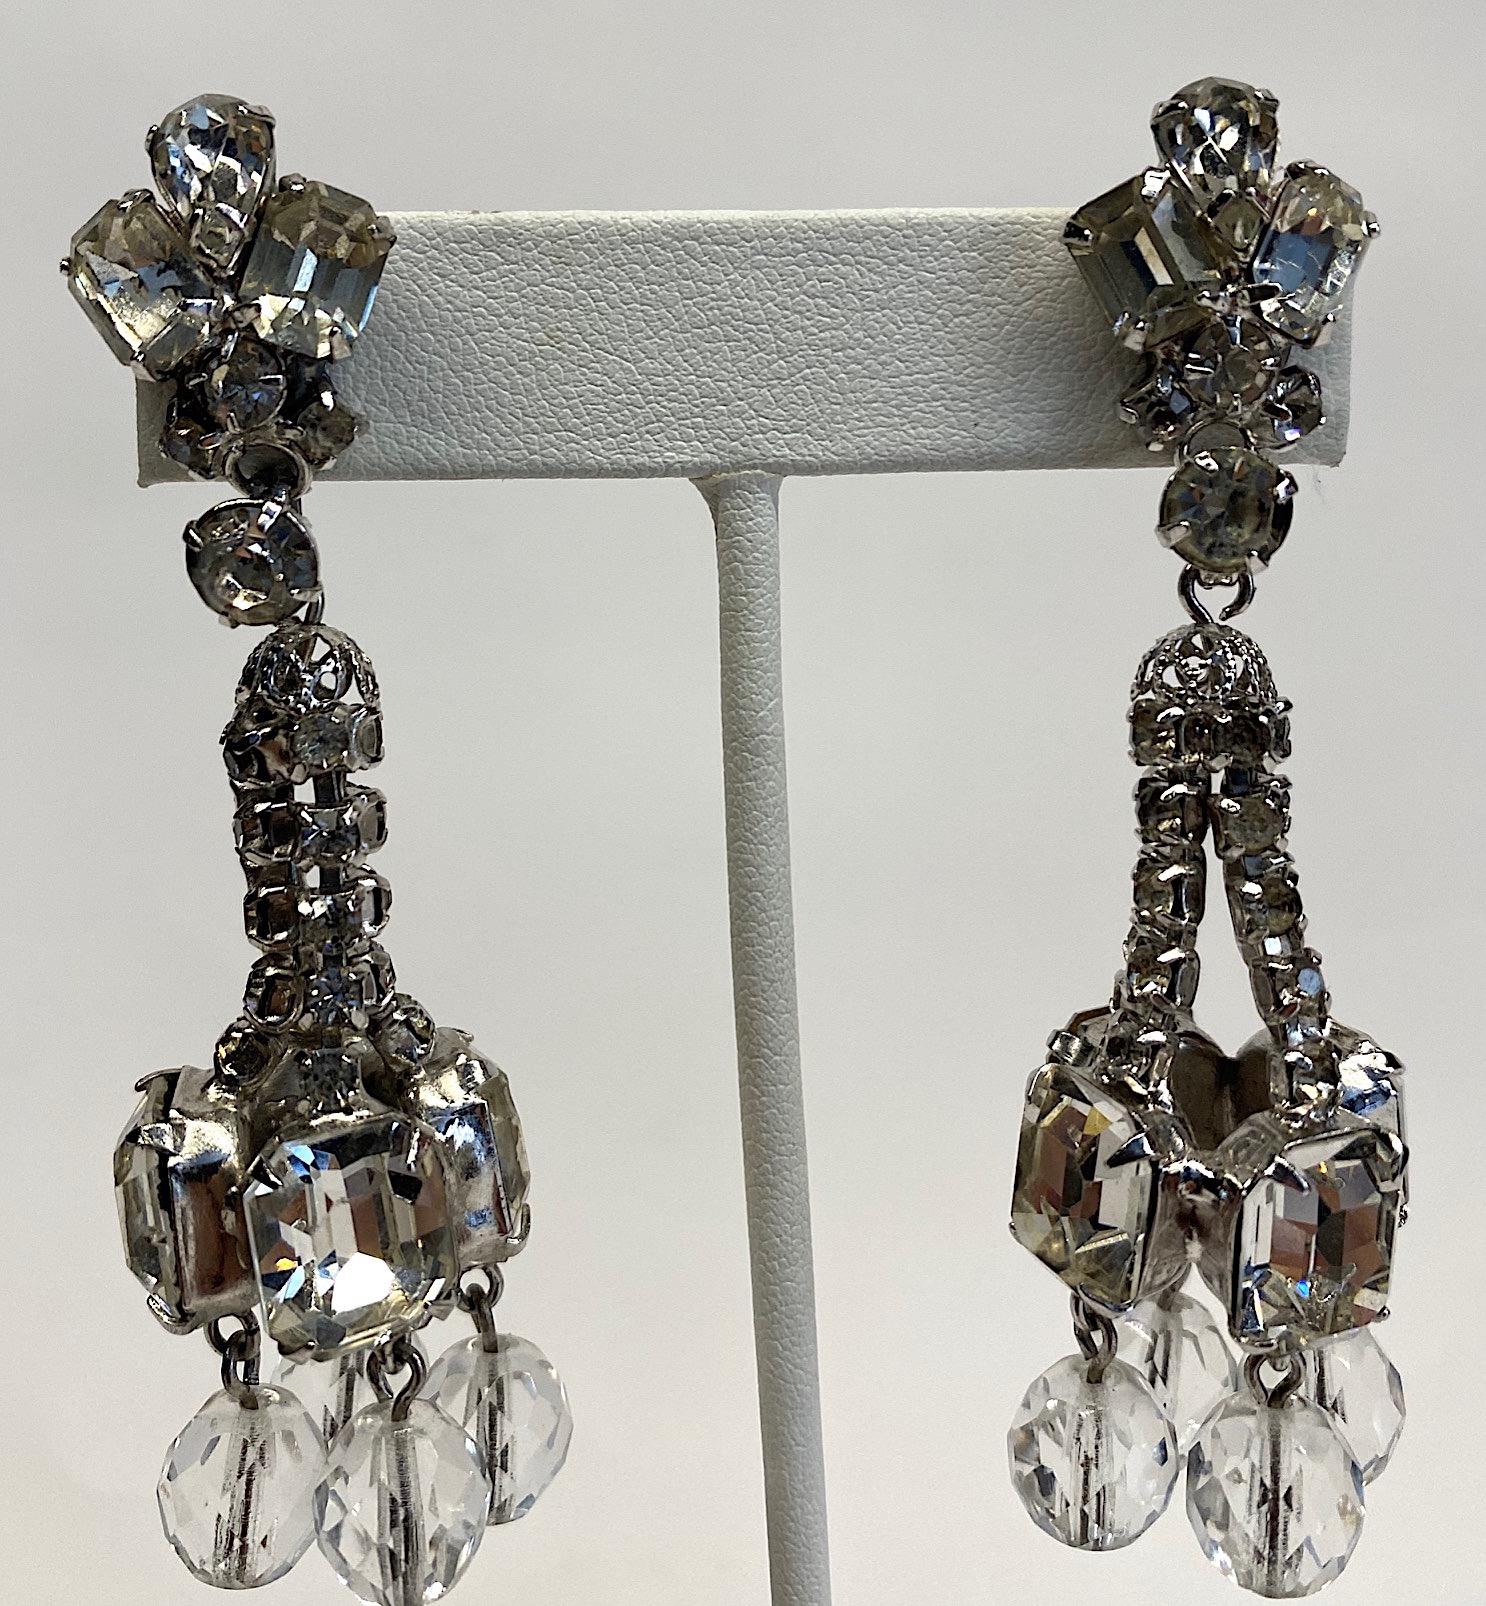 A lovely pair of late 1950s to early 1960s pendant rhinestone earrings with posts for pierced ears. Originally clip back, the previous owner has them converted to a post back. The metalwork is rhodium plate. The top of the earring is a comprised of